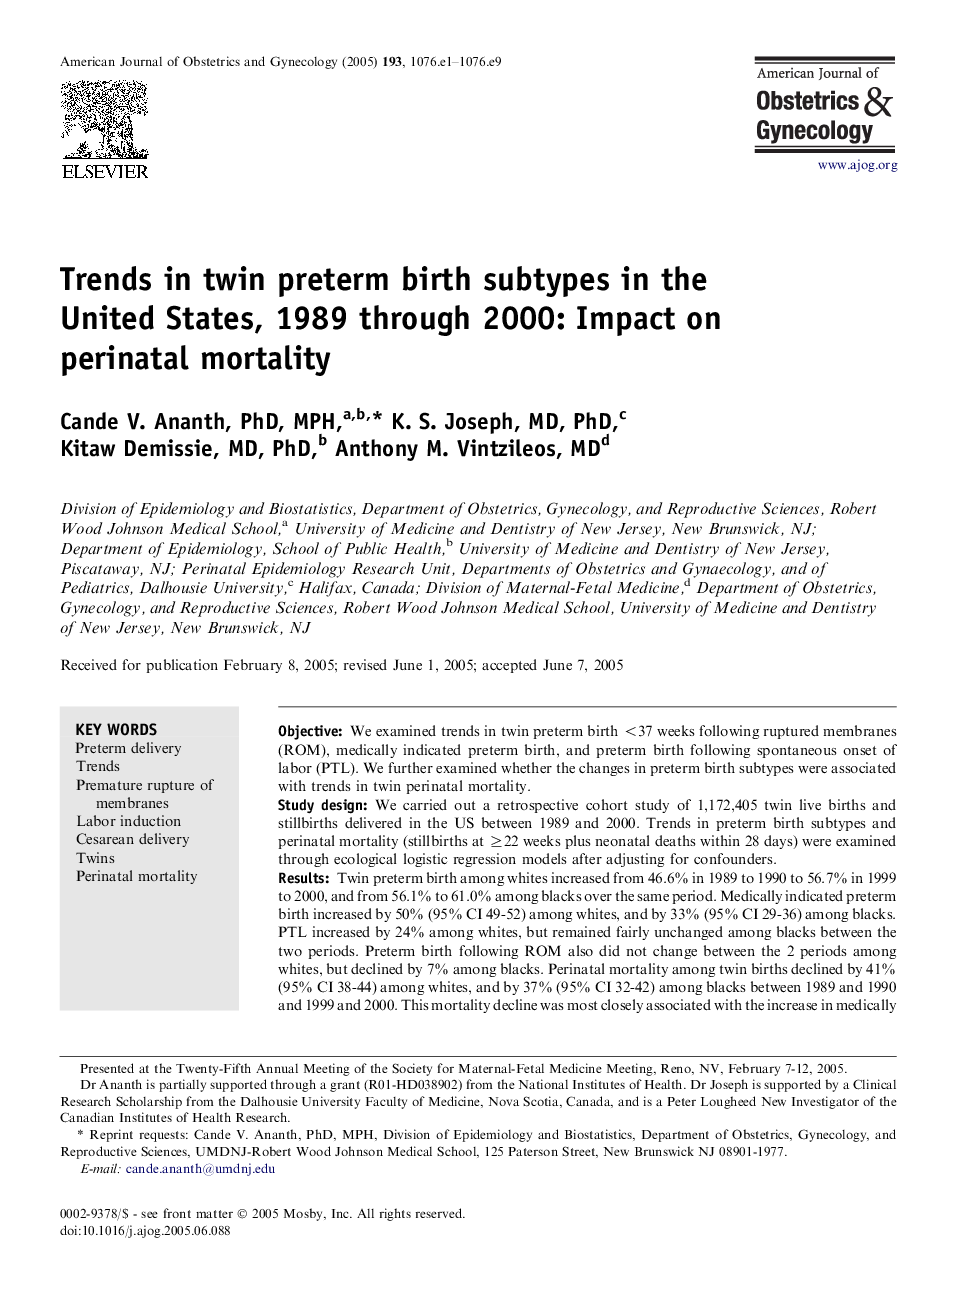 Trends in twin preterm birth subtypes in the United States, 1989 through 2000: Impact on perinatal mortality